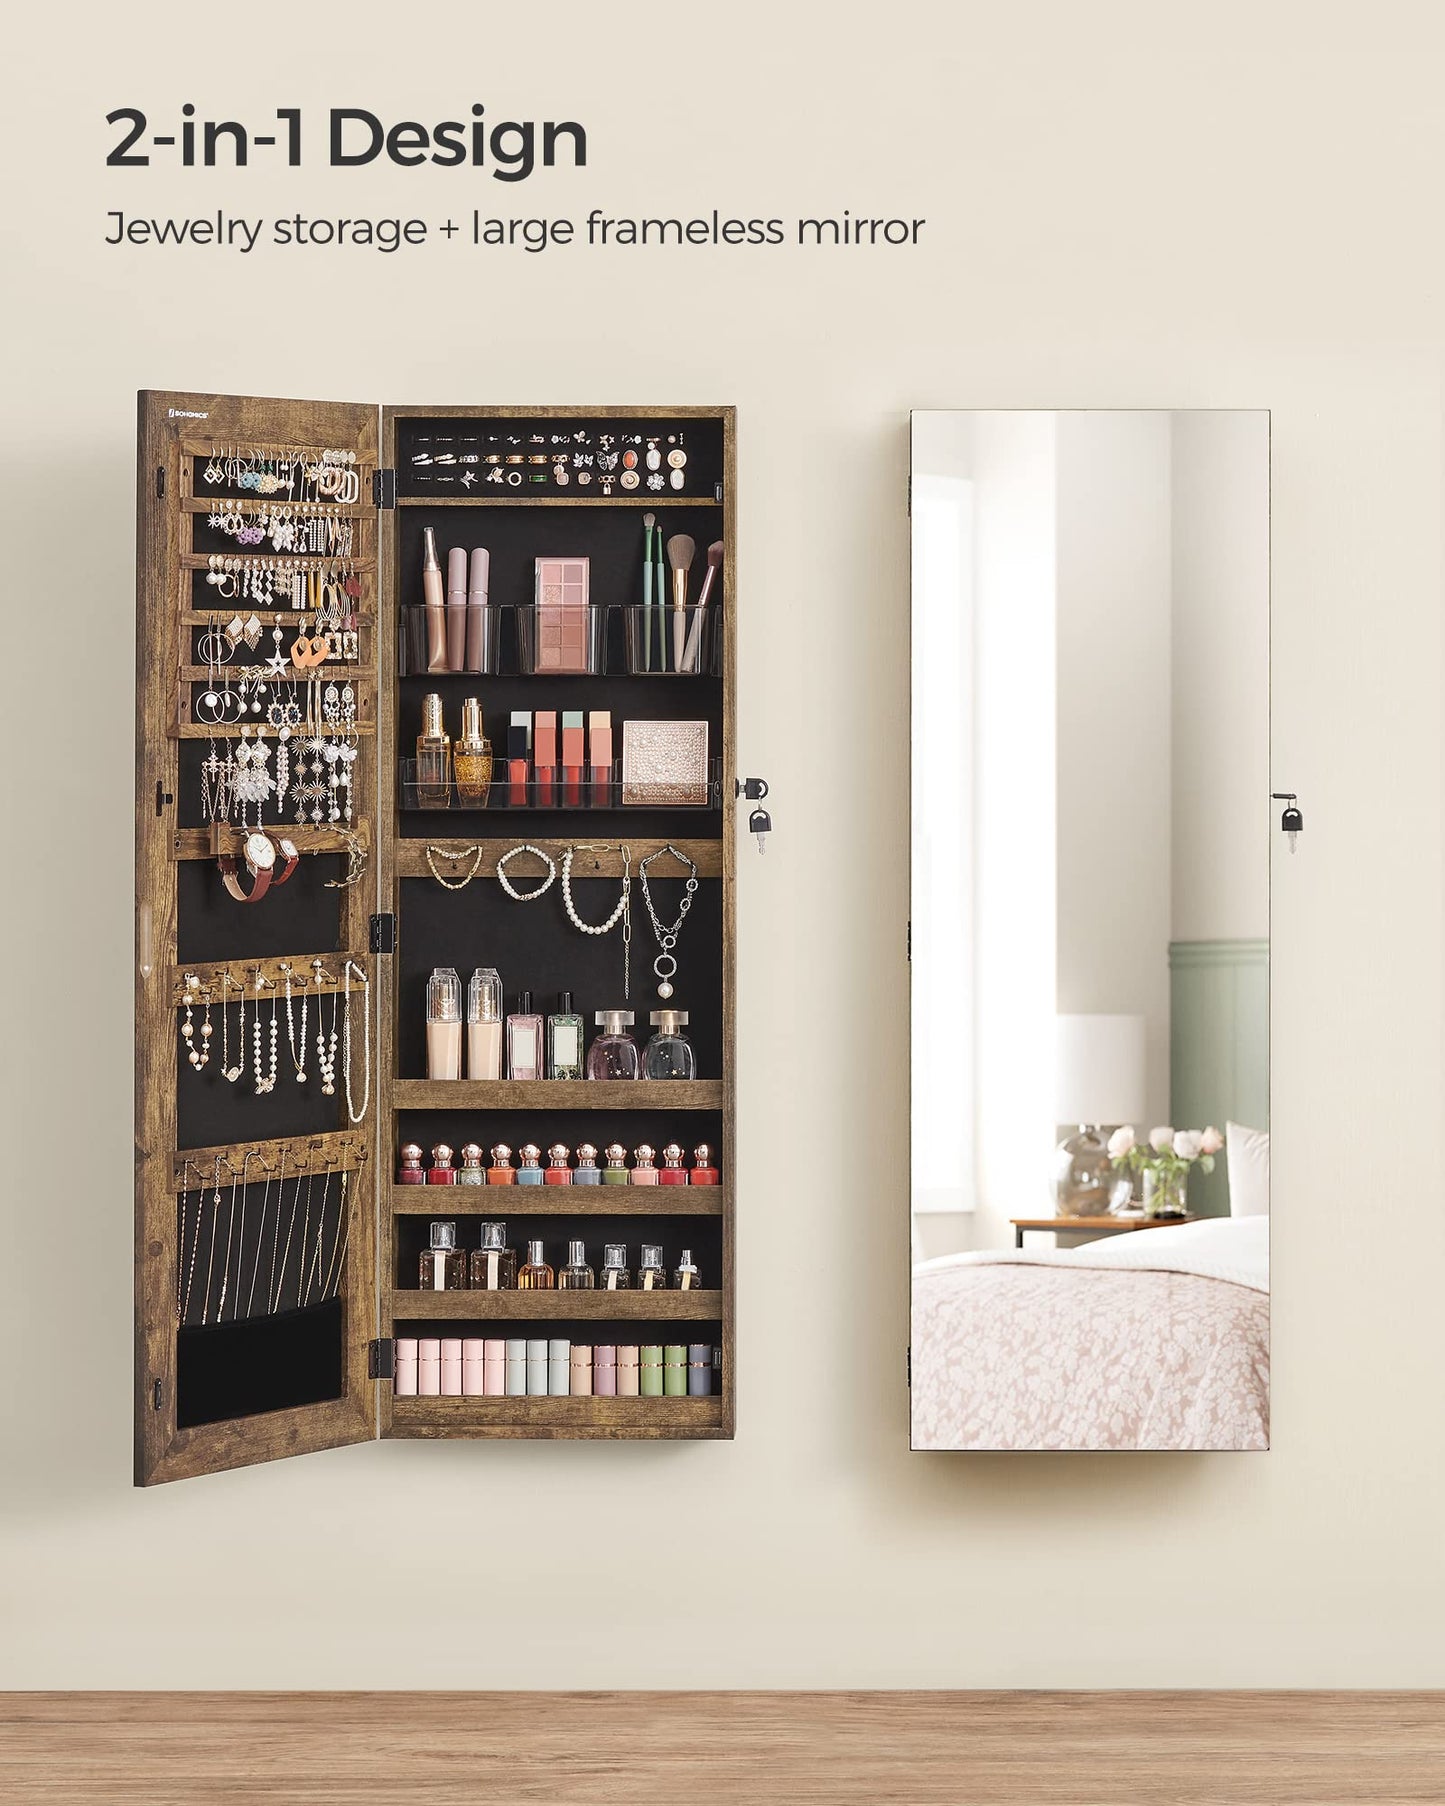 SONGMICS Jewelry Cabinet Armoire, Lockable Wall-Mounted Storage Organizer Unit with 2 Plastic Cosmetic Trays, Full-Length Frameless Mirror, Textured